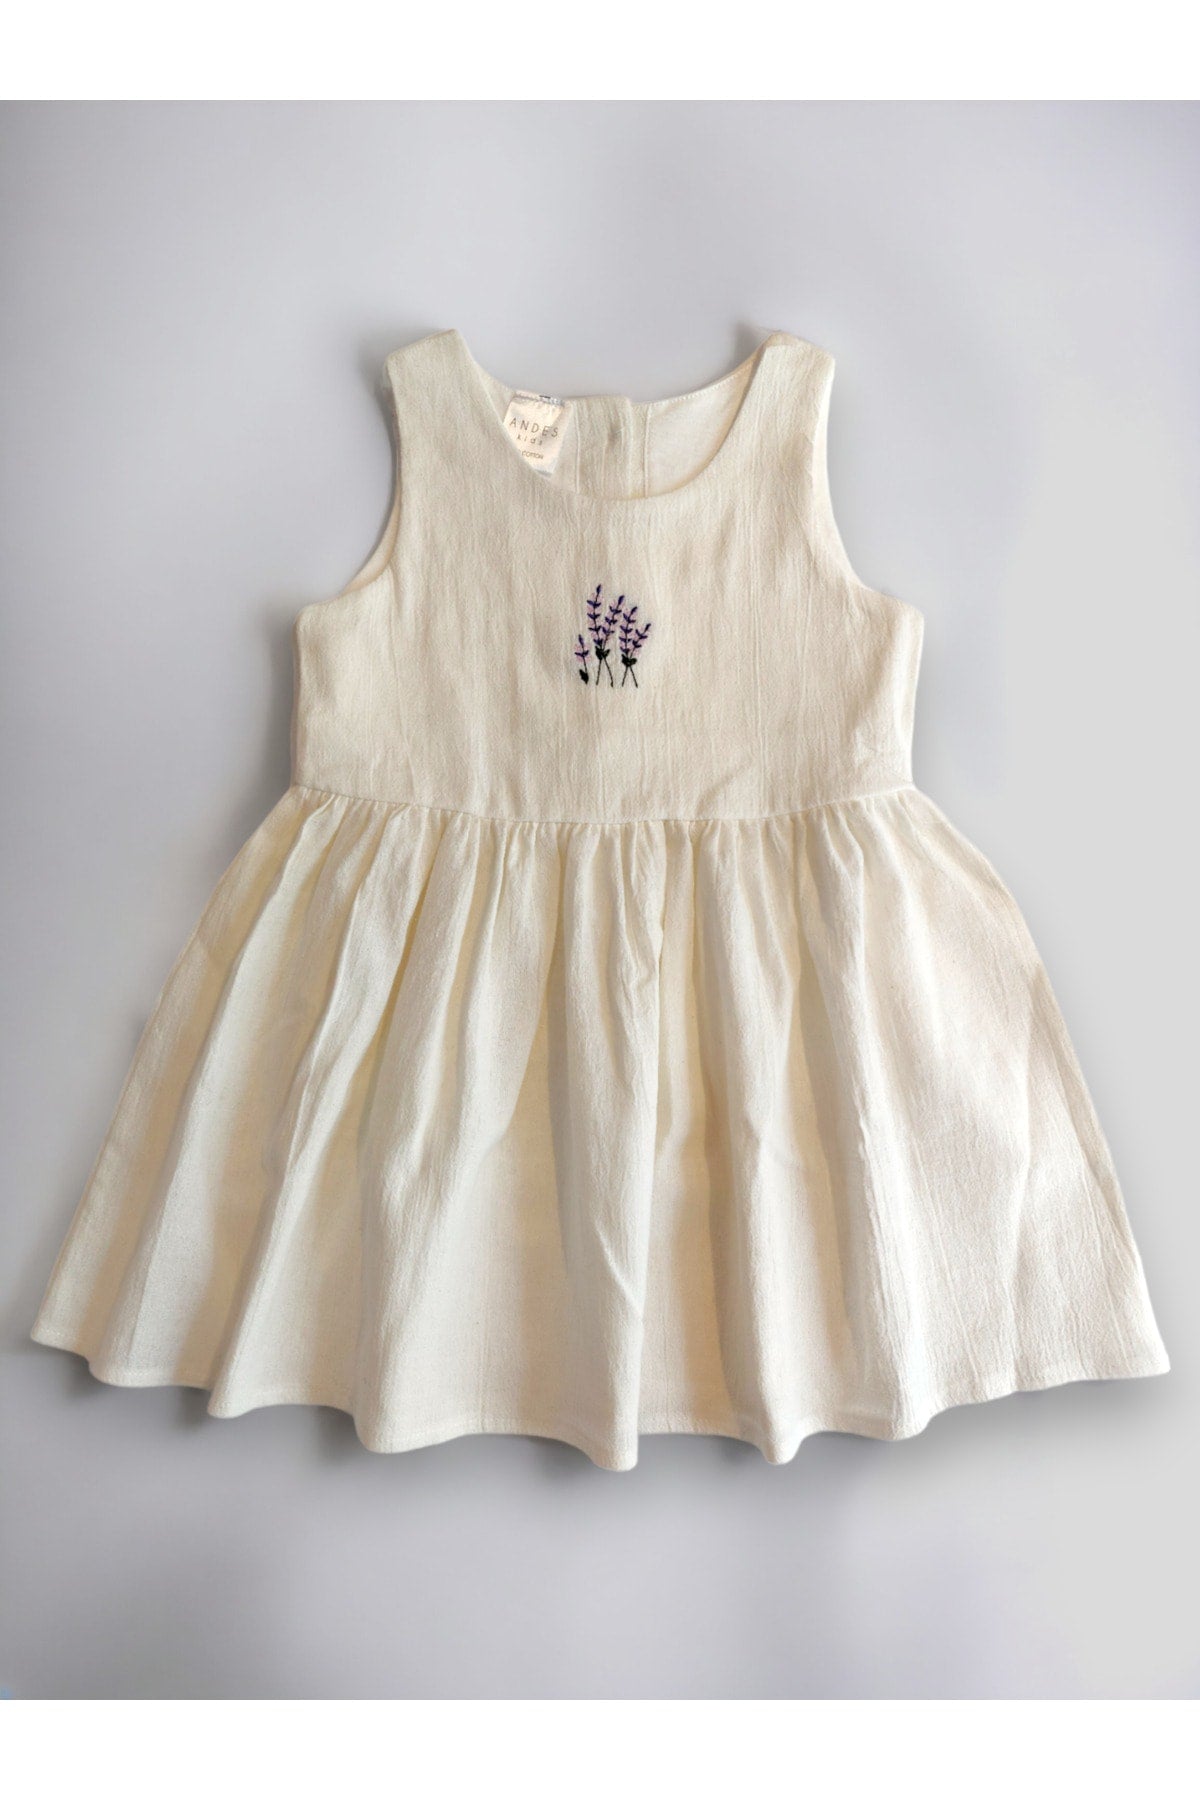 100% Cotton Organic Lavender Embroidery Girl Dress 1-5 Years